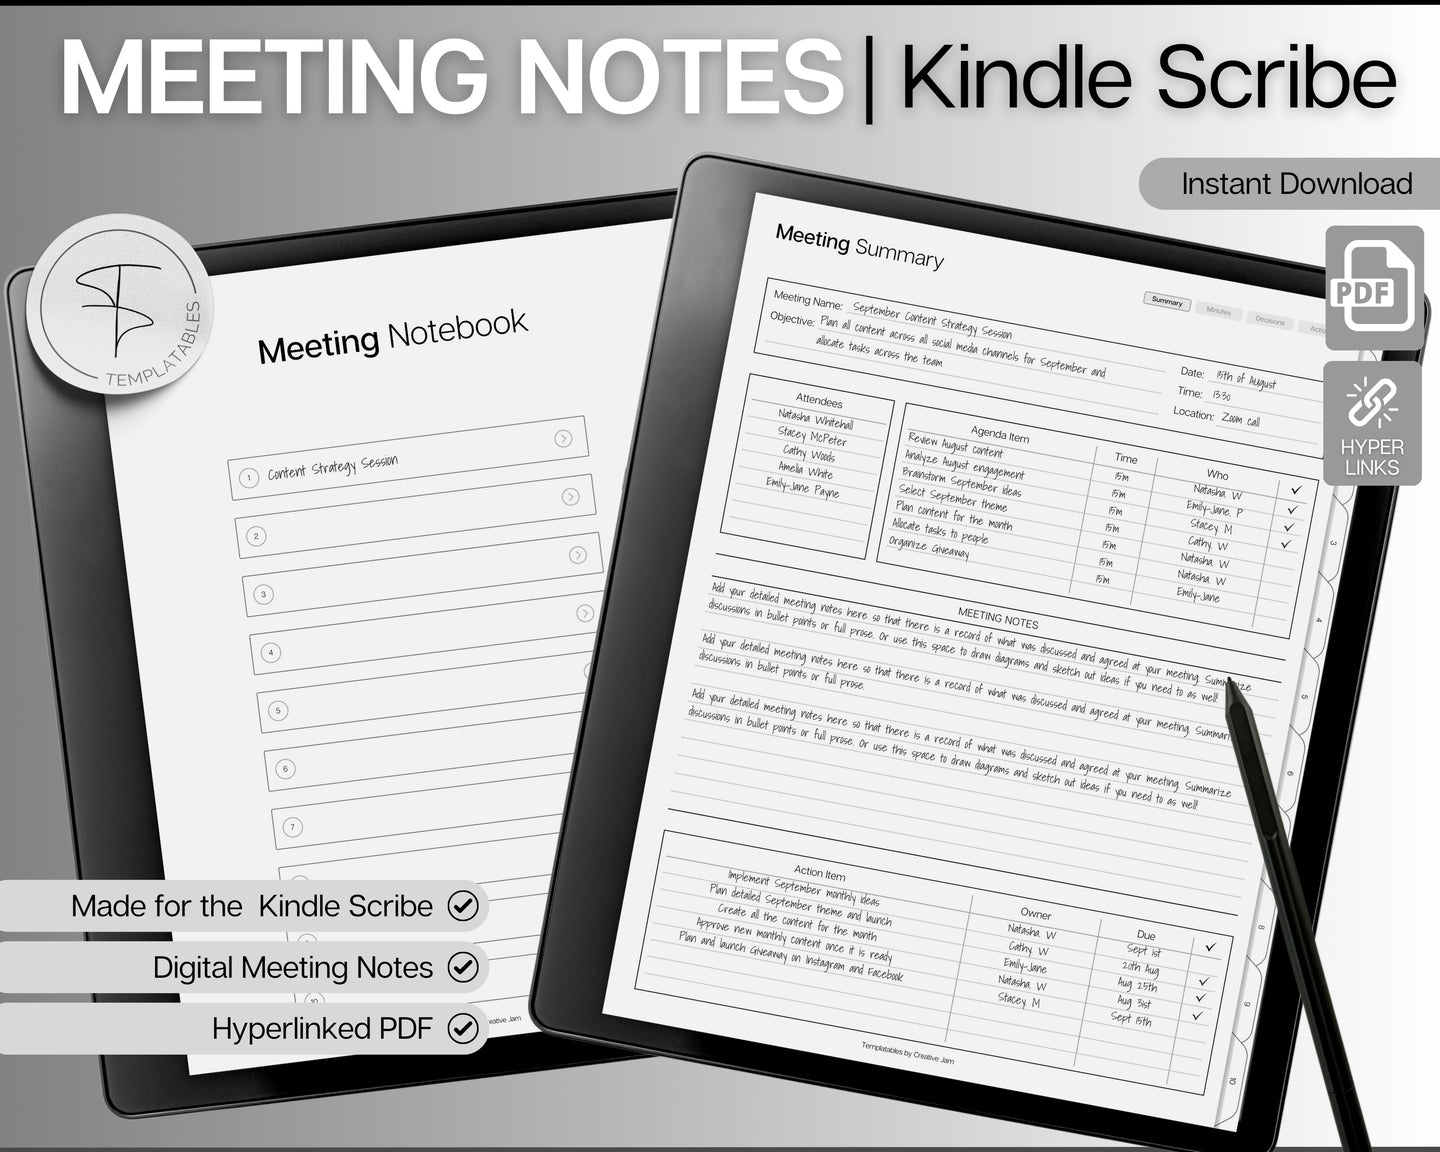 Kindle Scribe Meeting Notes templates | Meeting Minutes, Meeting Agenda, Meeting Note taking template, Project planner, Task List, Kindle Scribe Planner